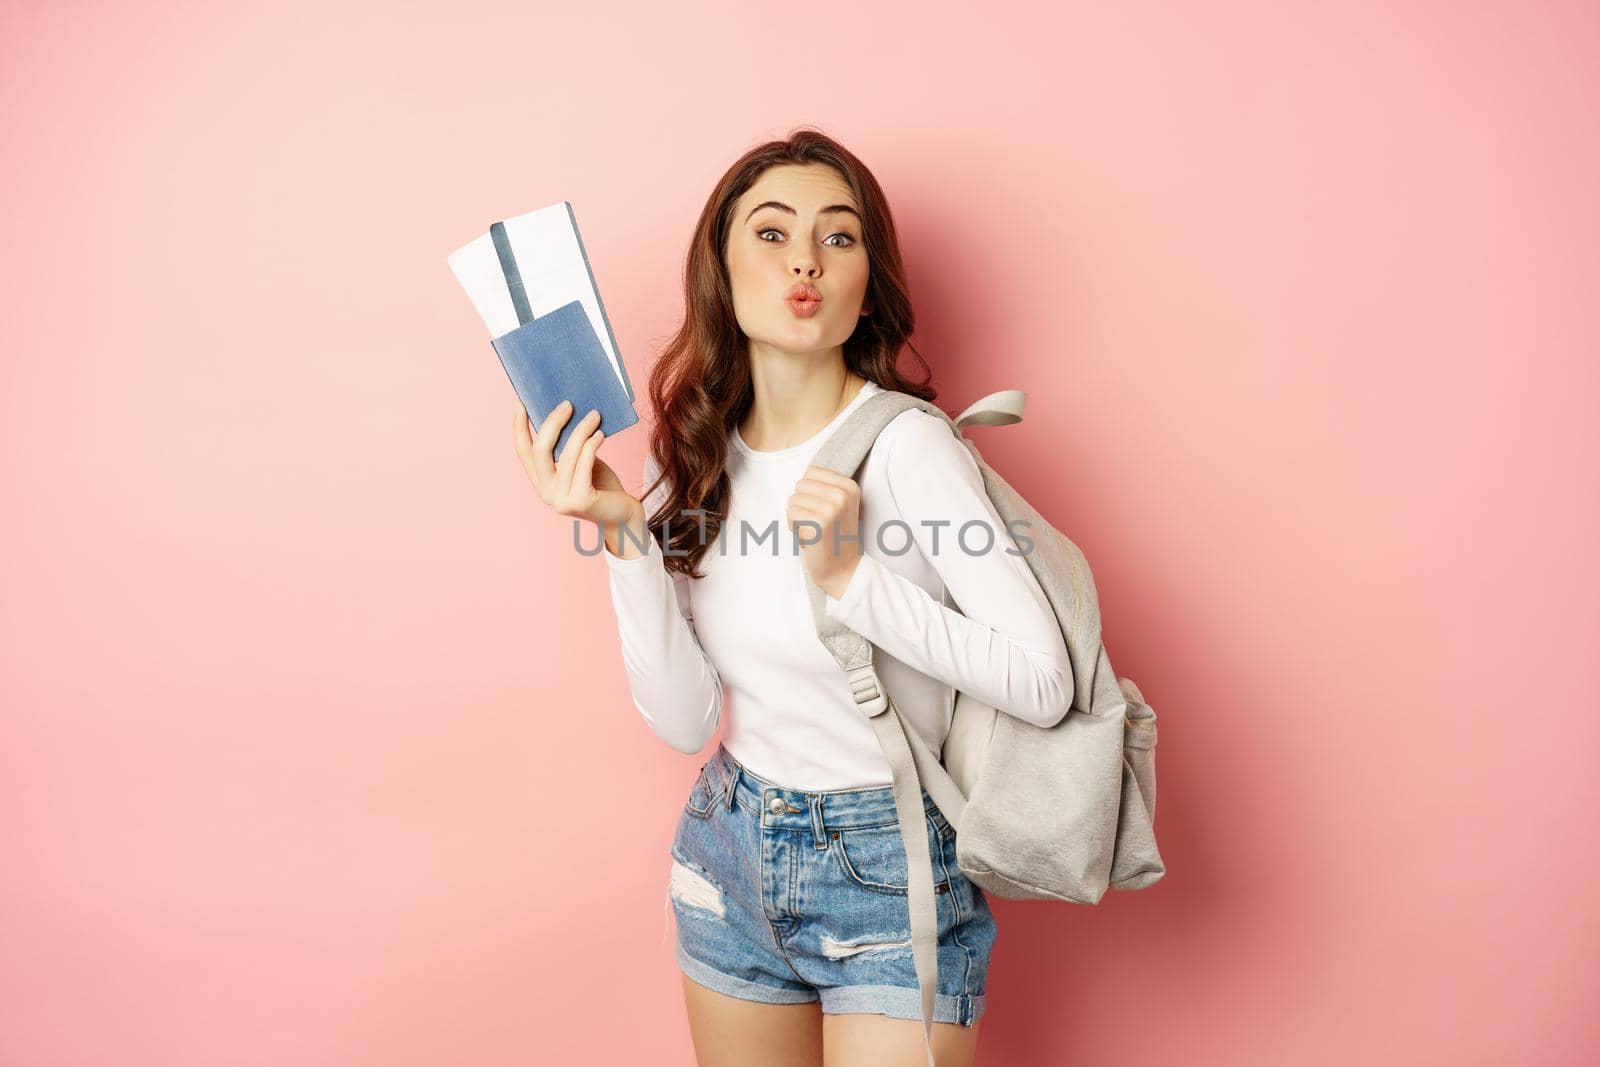 Beautiful girl on vacation, going on trip with passport and tickets, holding backpack. Young woman traveller backpacking, standing over pink background.